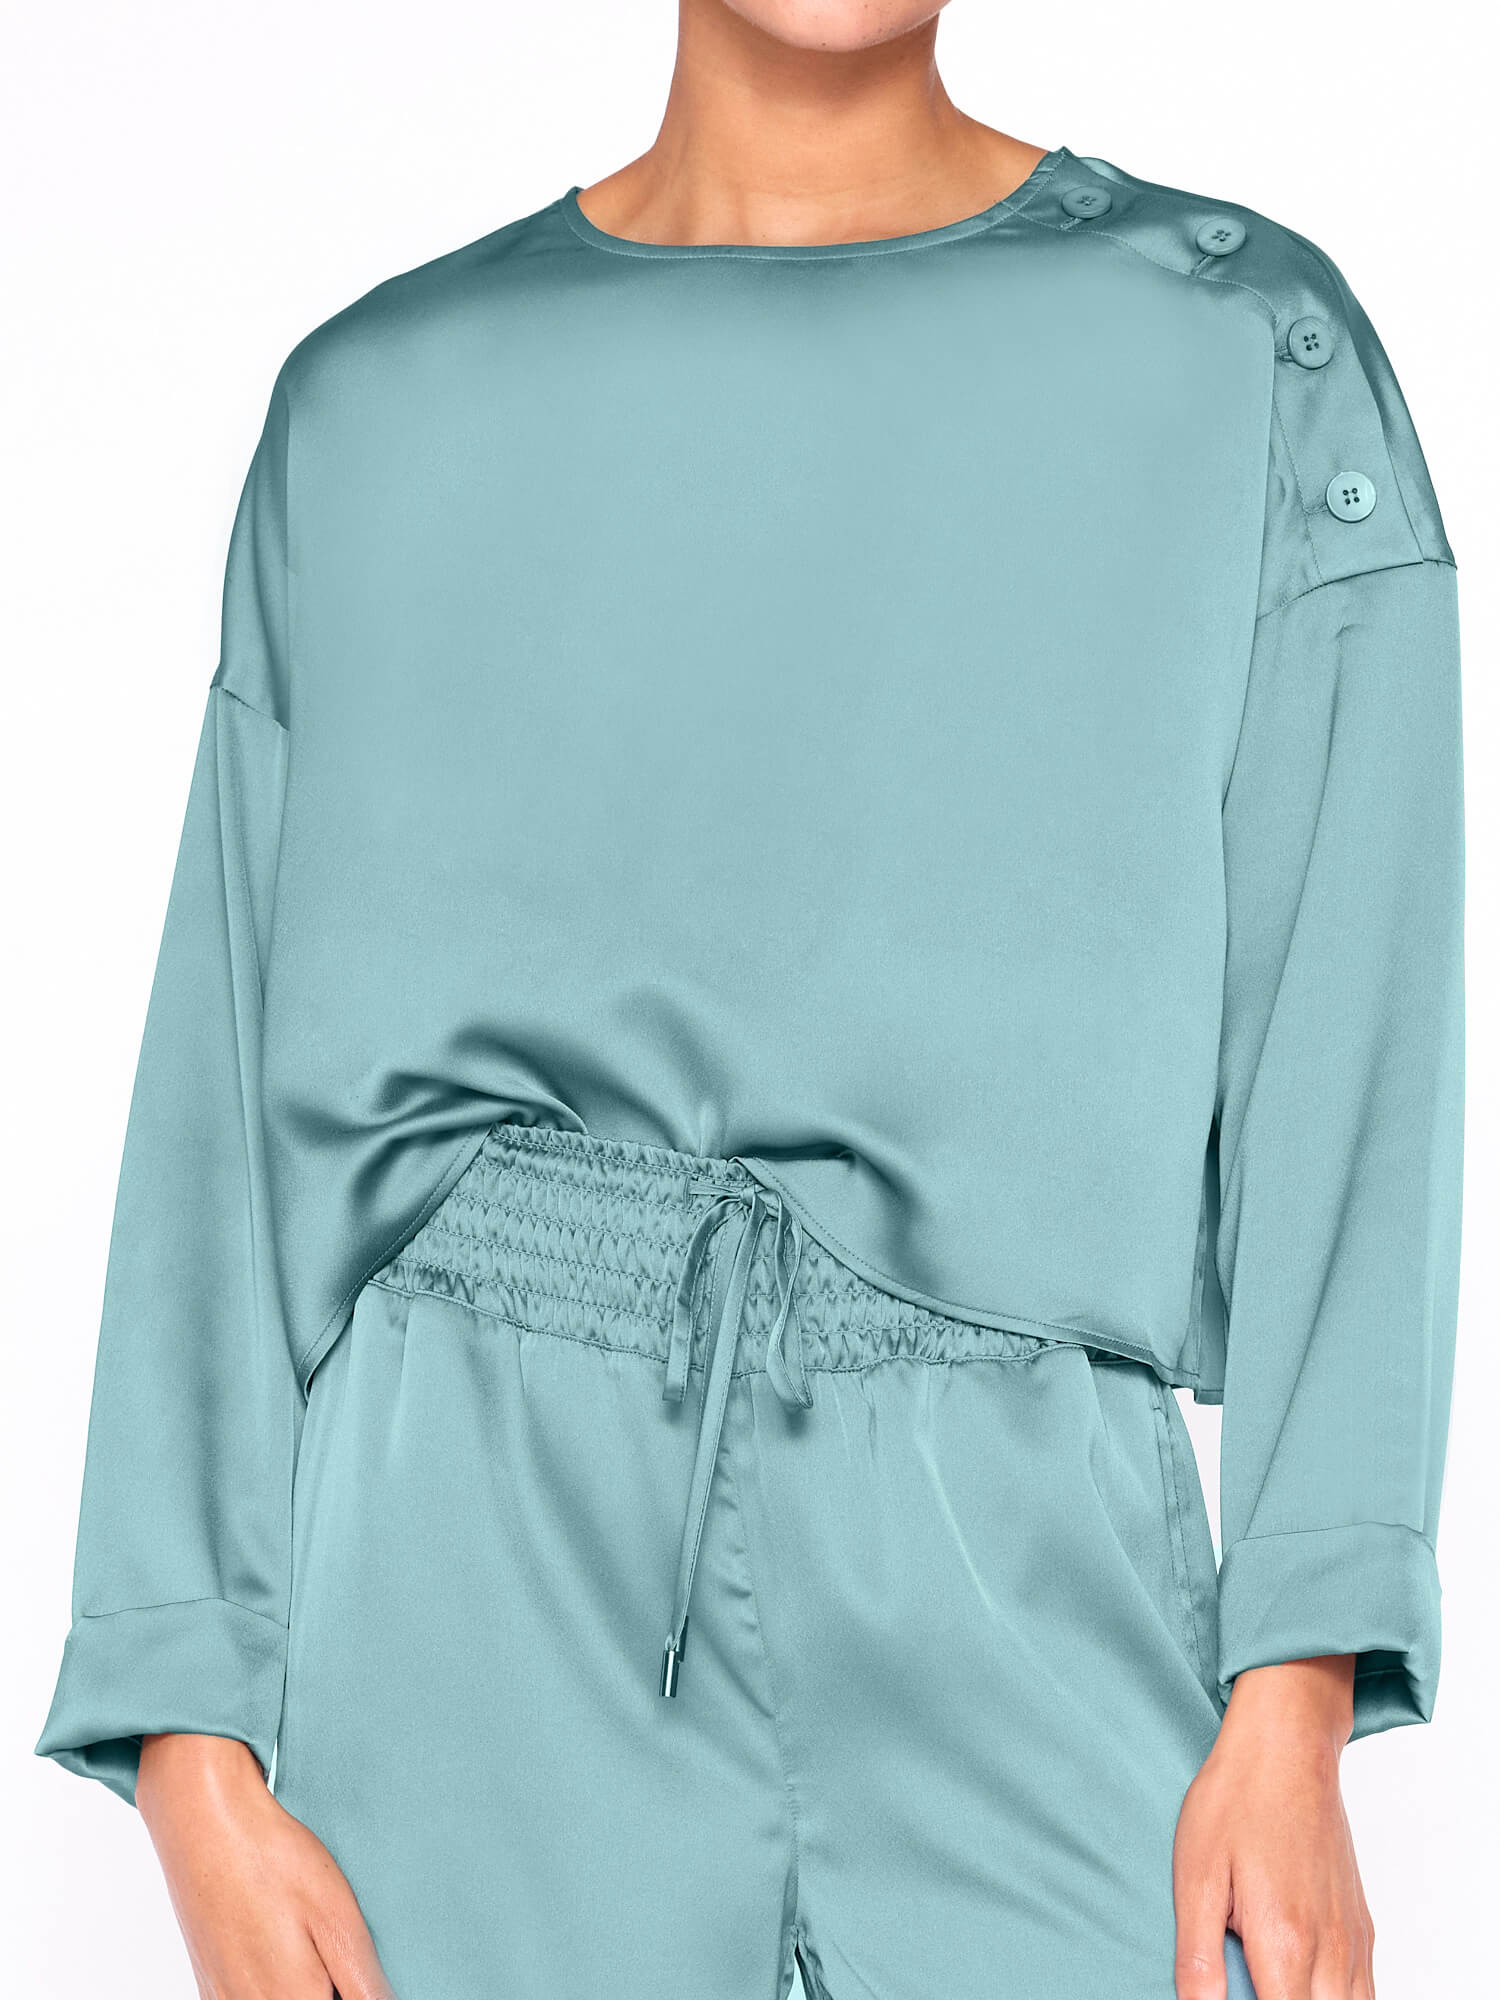 Dallas satin teal blue blouse front view 2